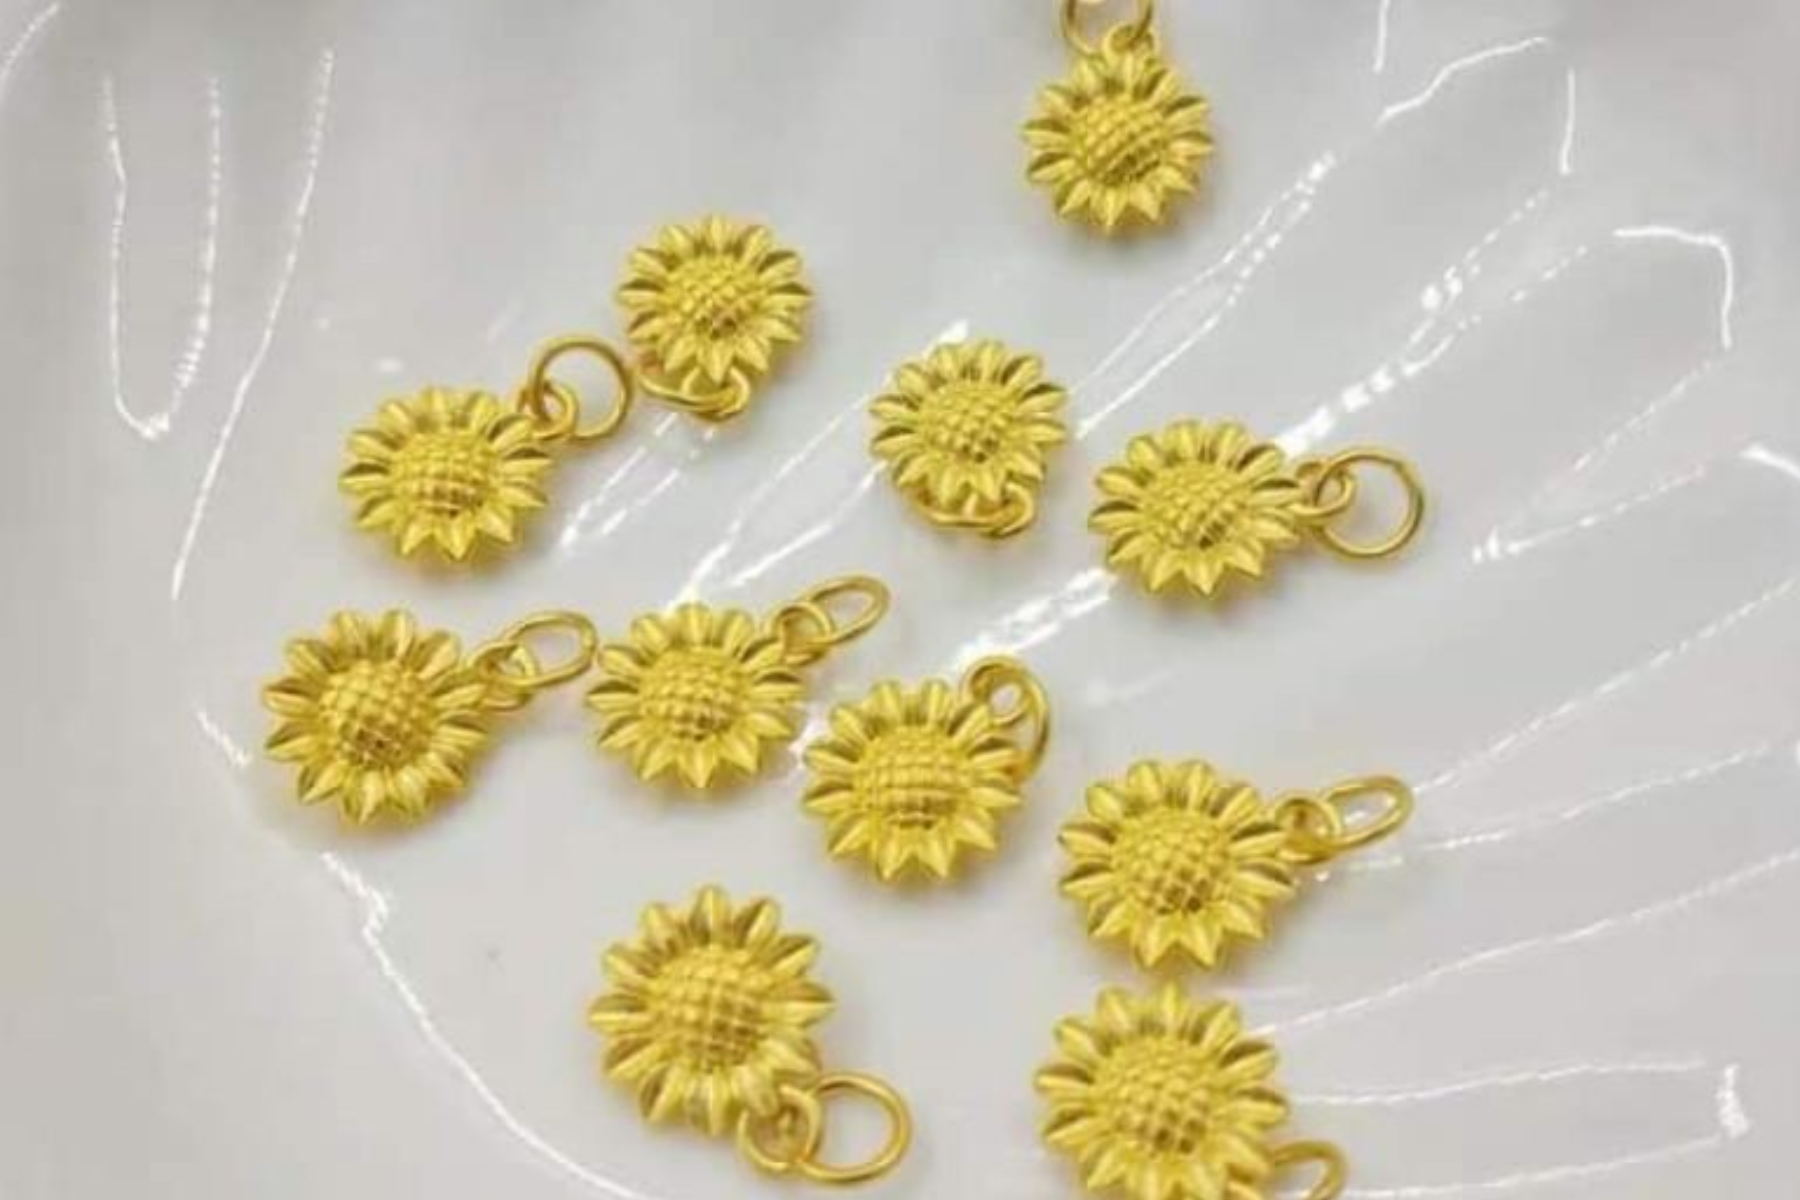 A photo of eleven yellow sunflower pendants